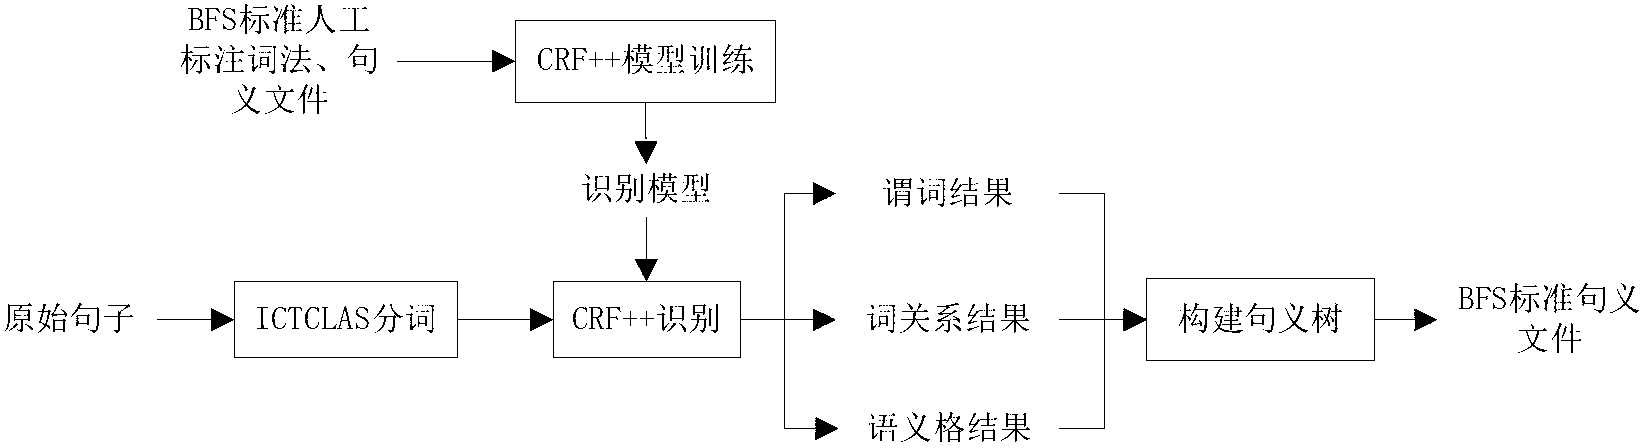 Chinese sentence meaning structure model automatic labeling method based on CRF ++